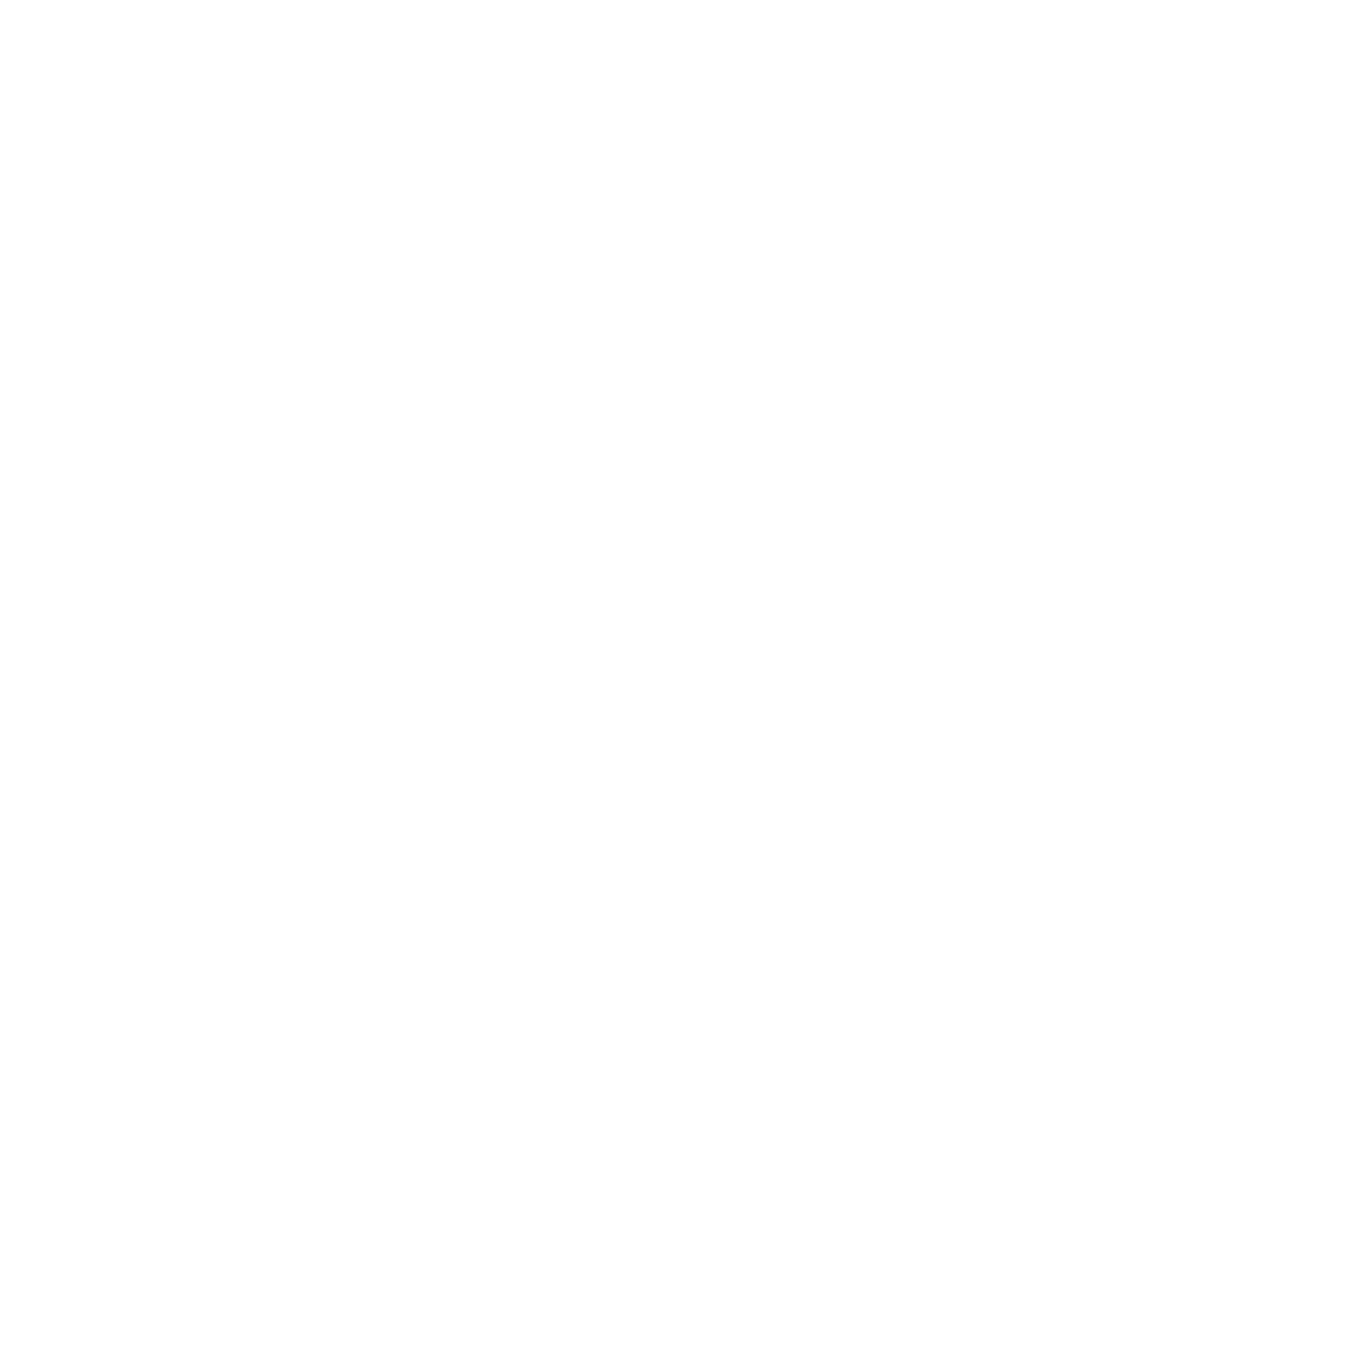 reverse white Encore image with cup